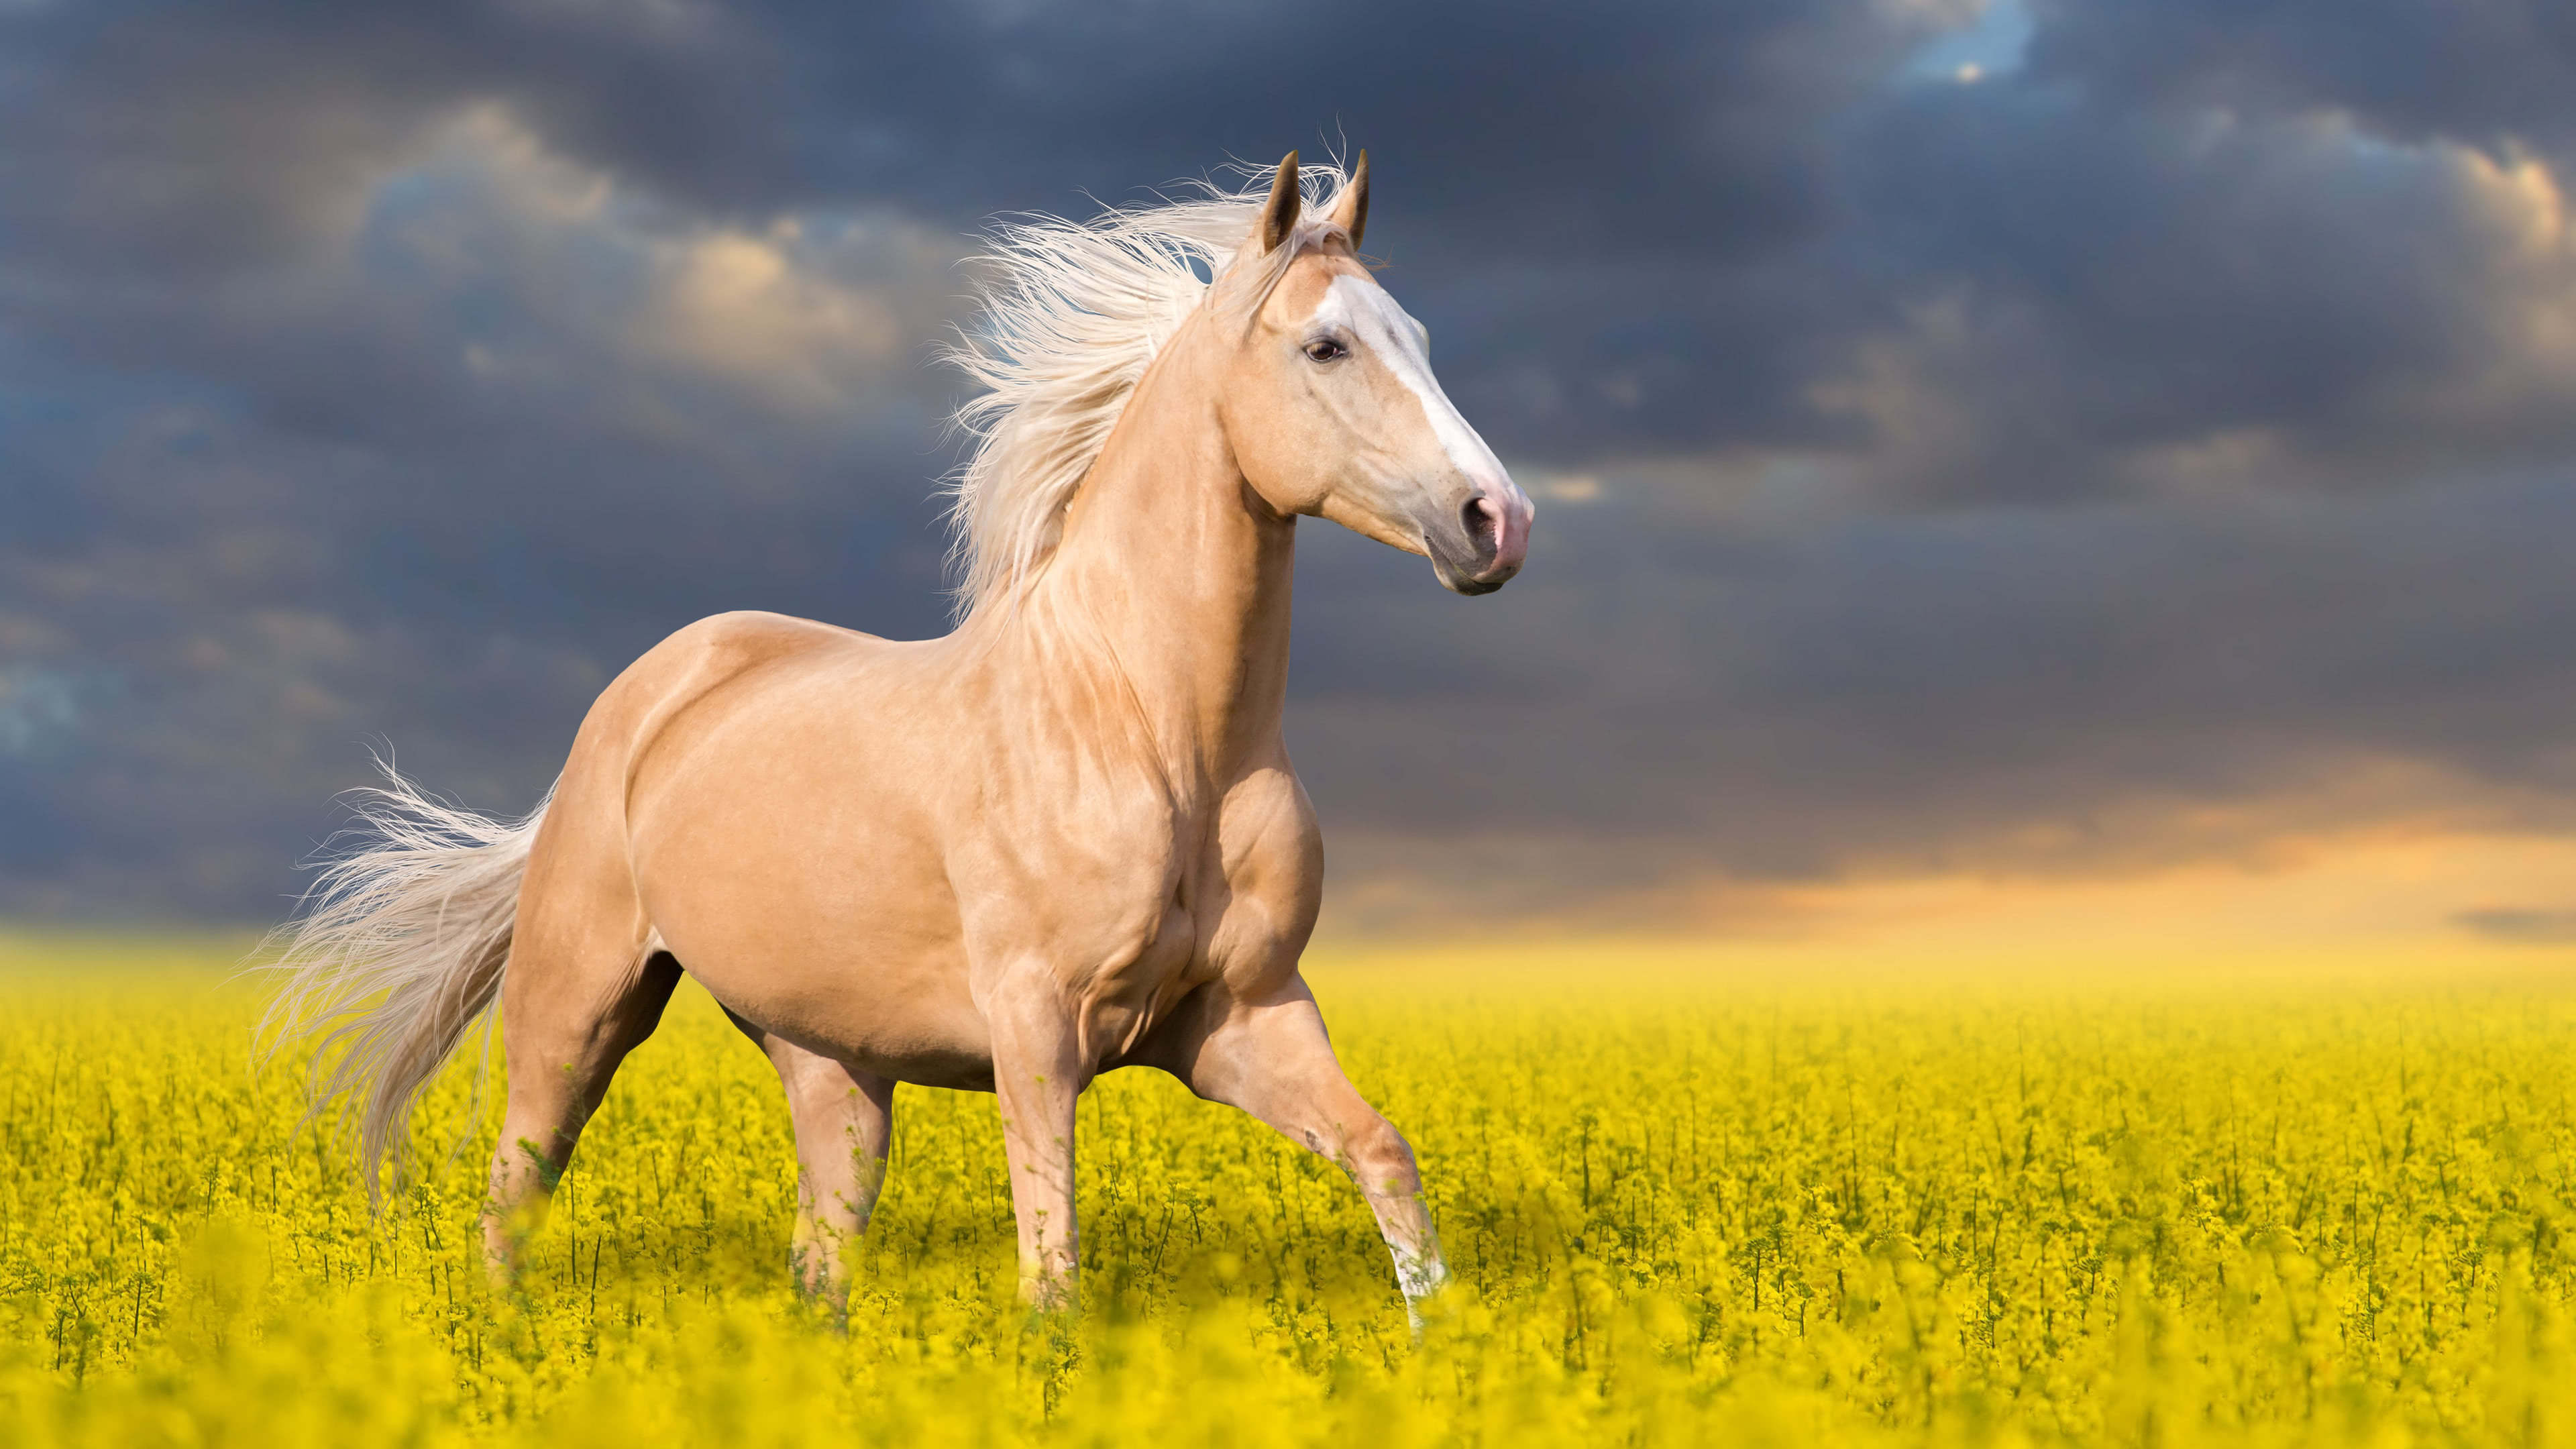 Horse: Palomino, A color breed, exhibiting a yellow or gold coat, and a white or light cream mane and tail. 3840x2160 4K Wallpaper.